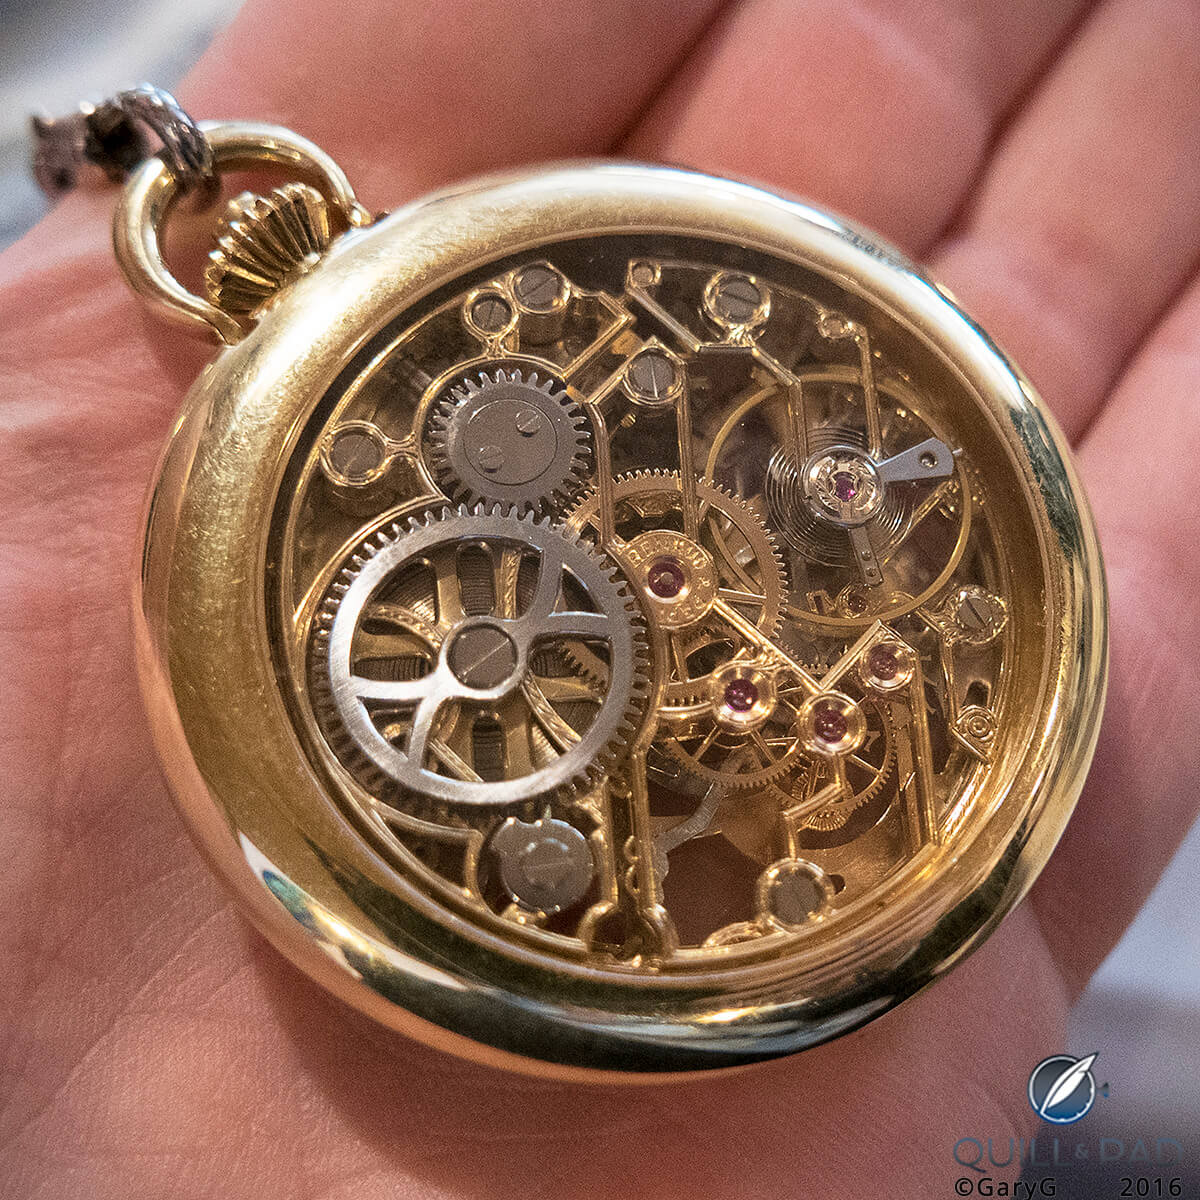 Reverse of the Renaud & Papi perpetual calendar pocket watch, inscribed at center